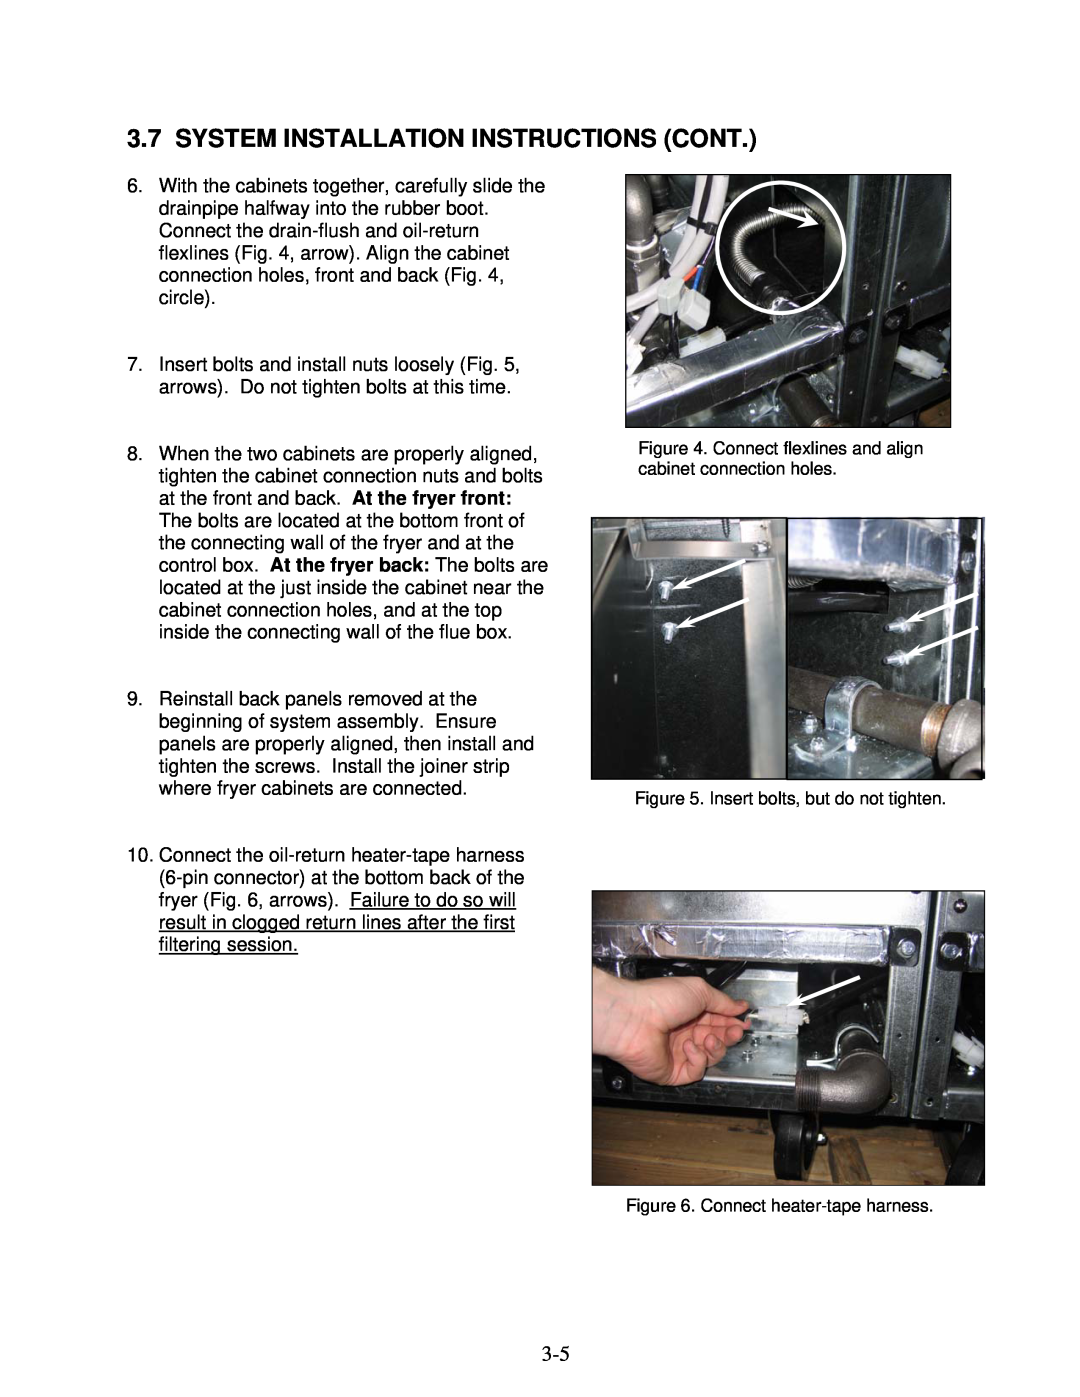 Frymaster YSCFC24 System Installation Instructions Cont, Insert bolts, but do not tighten, Connect heater-tapeharness 